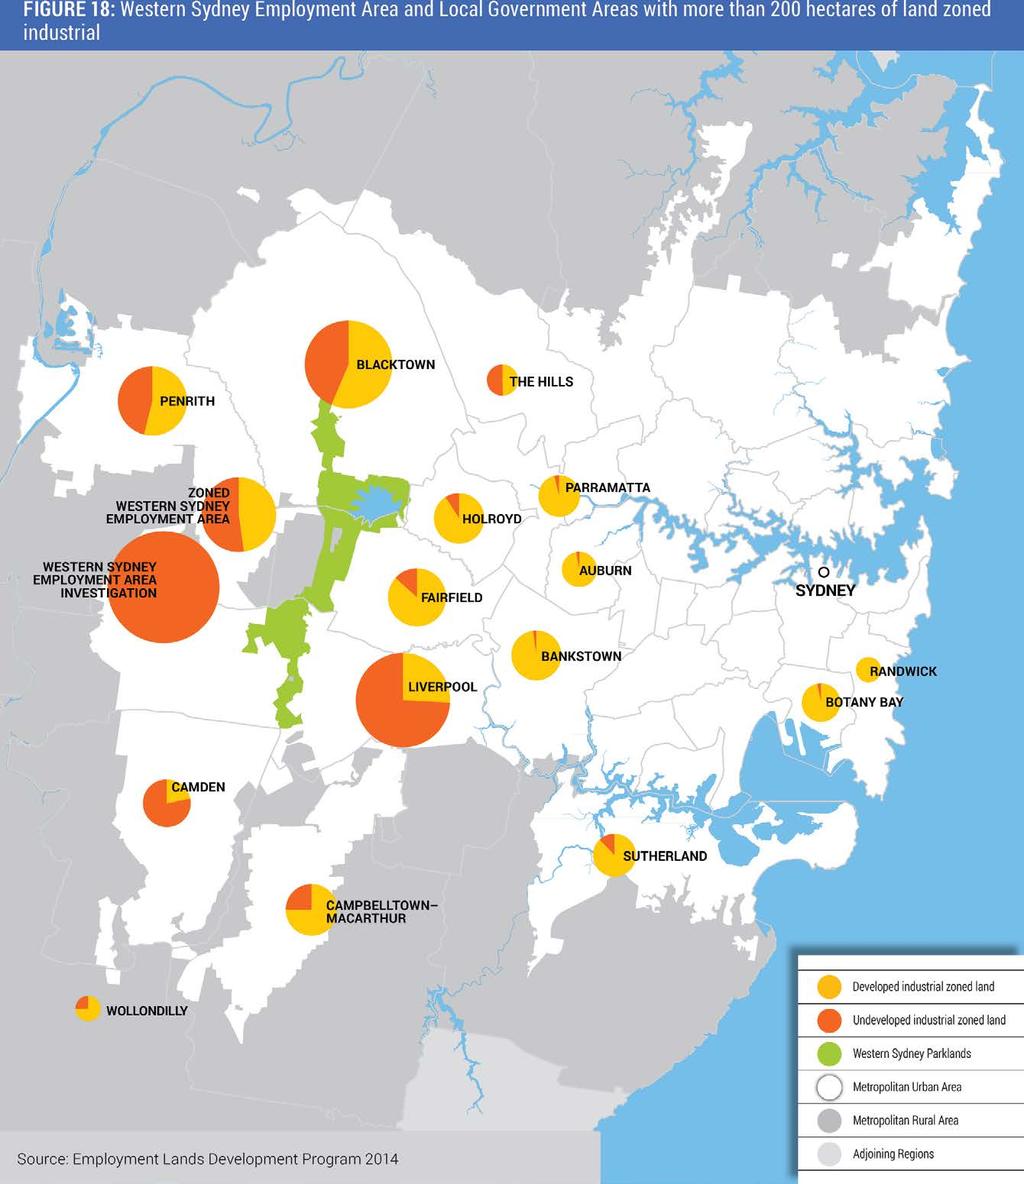 GOAL ONE: SYDNEY S COMPETITIVE ECONOMY 53 FIGURE 18: Western Sydney Employment Area and Local Government